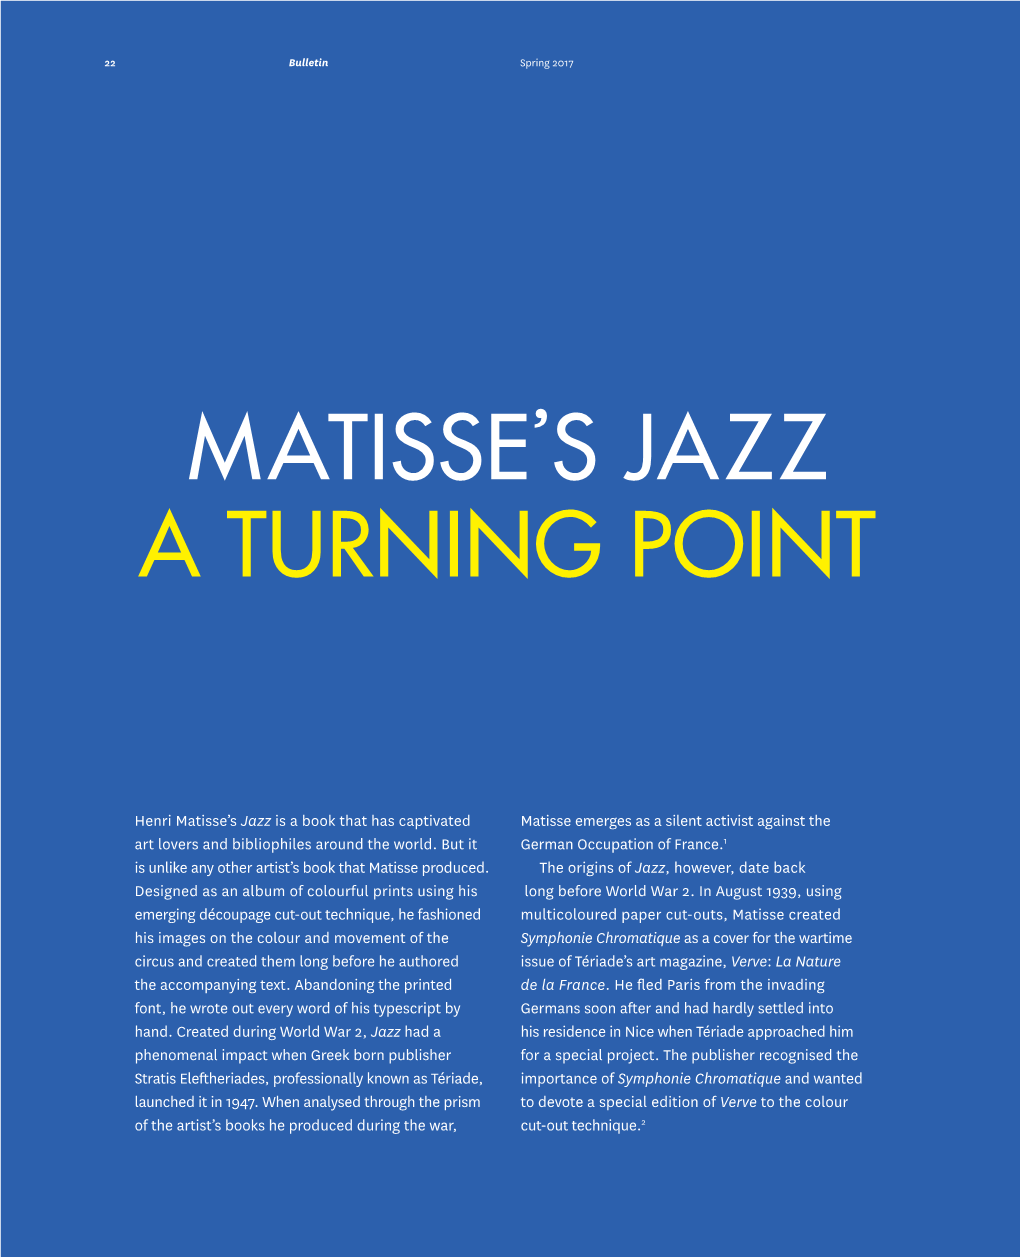 Matisse's Jazz a Turning Point